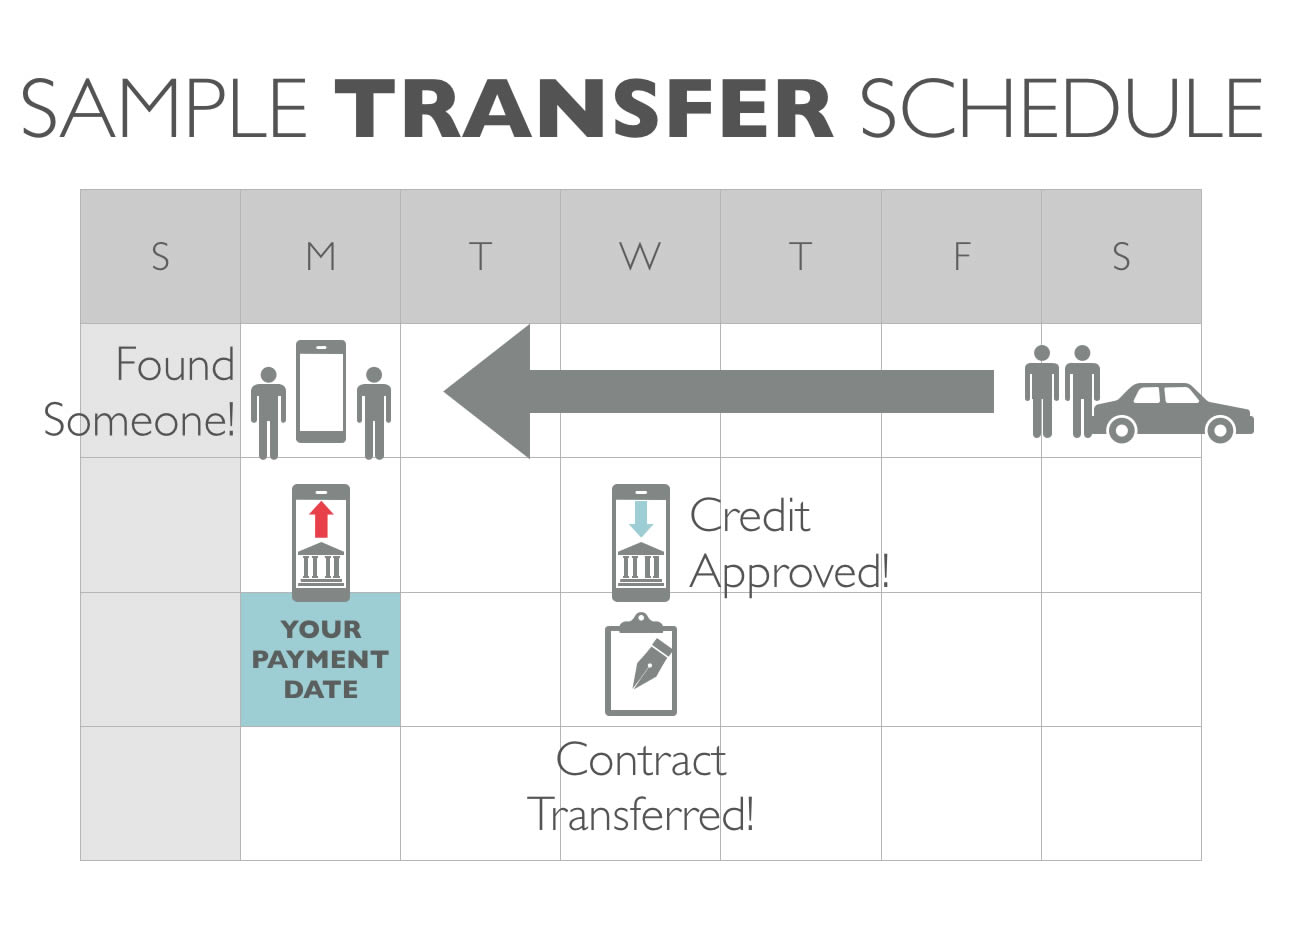 Lease Takeover: Transfer Before the Next Payment - Step 3